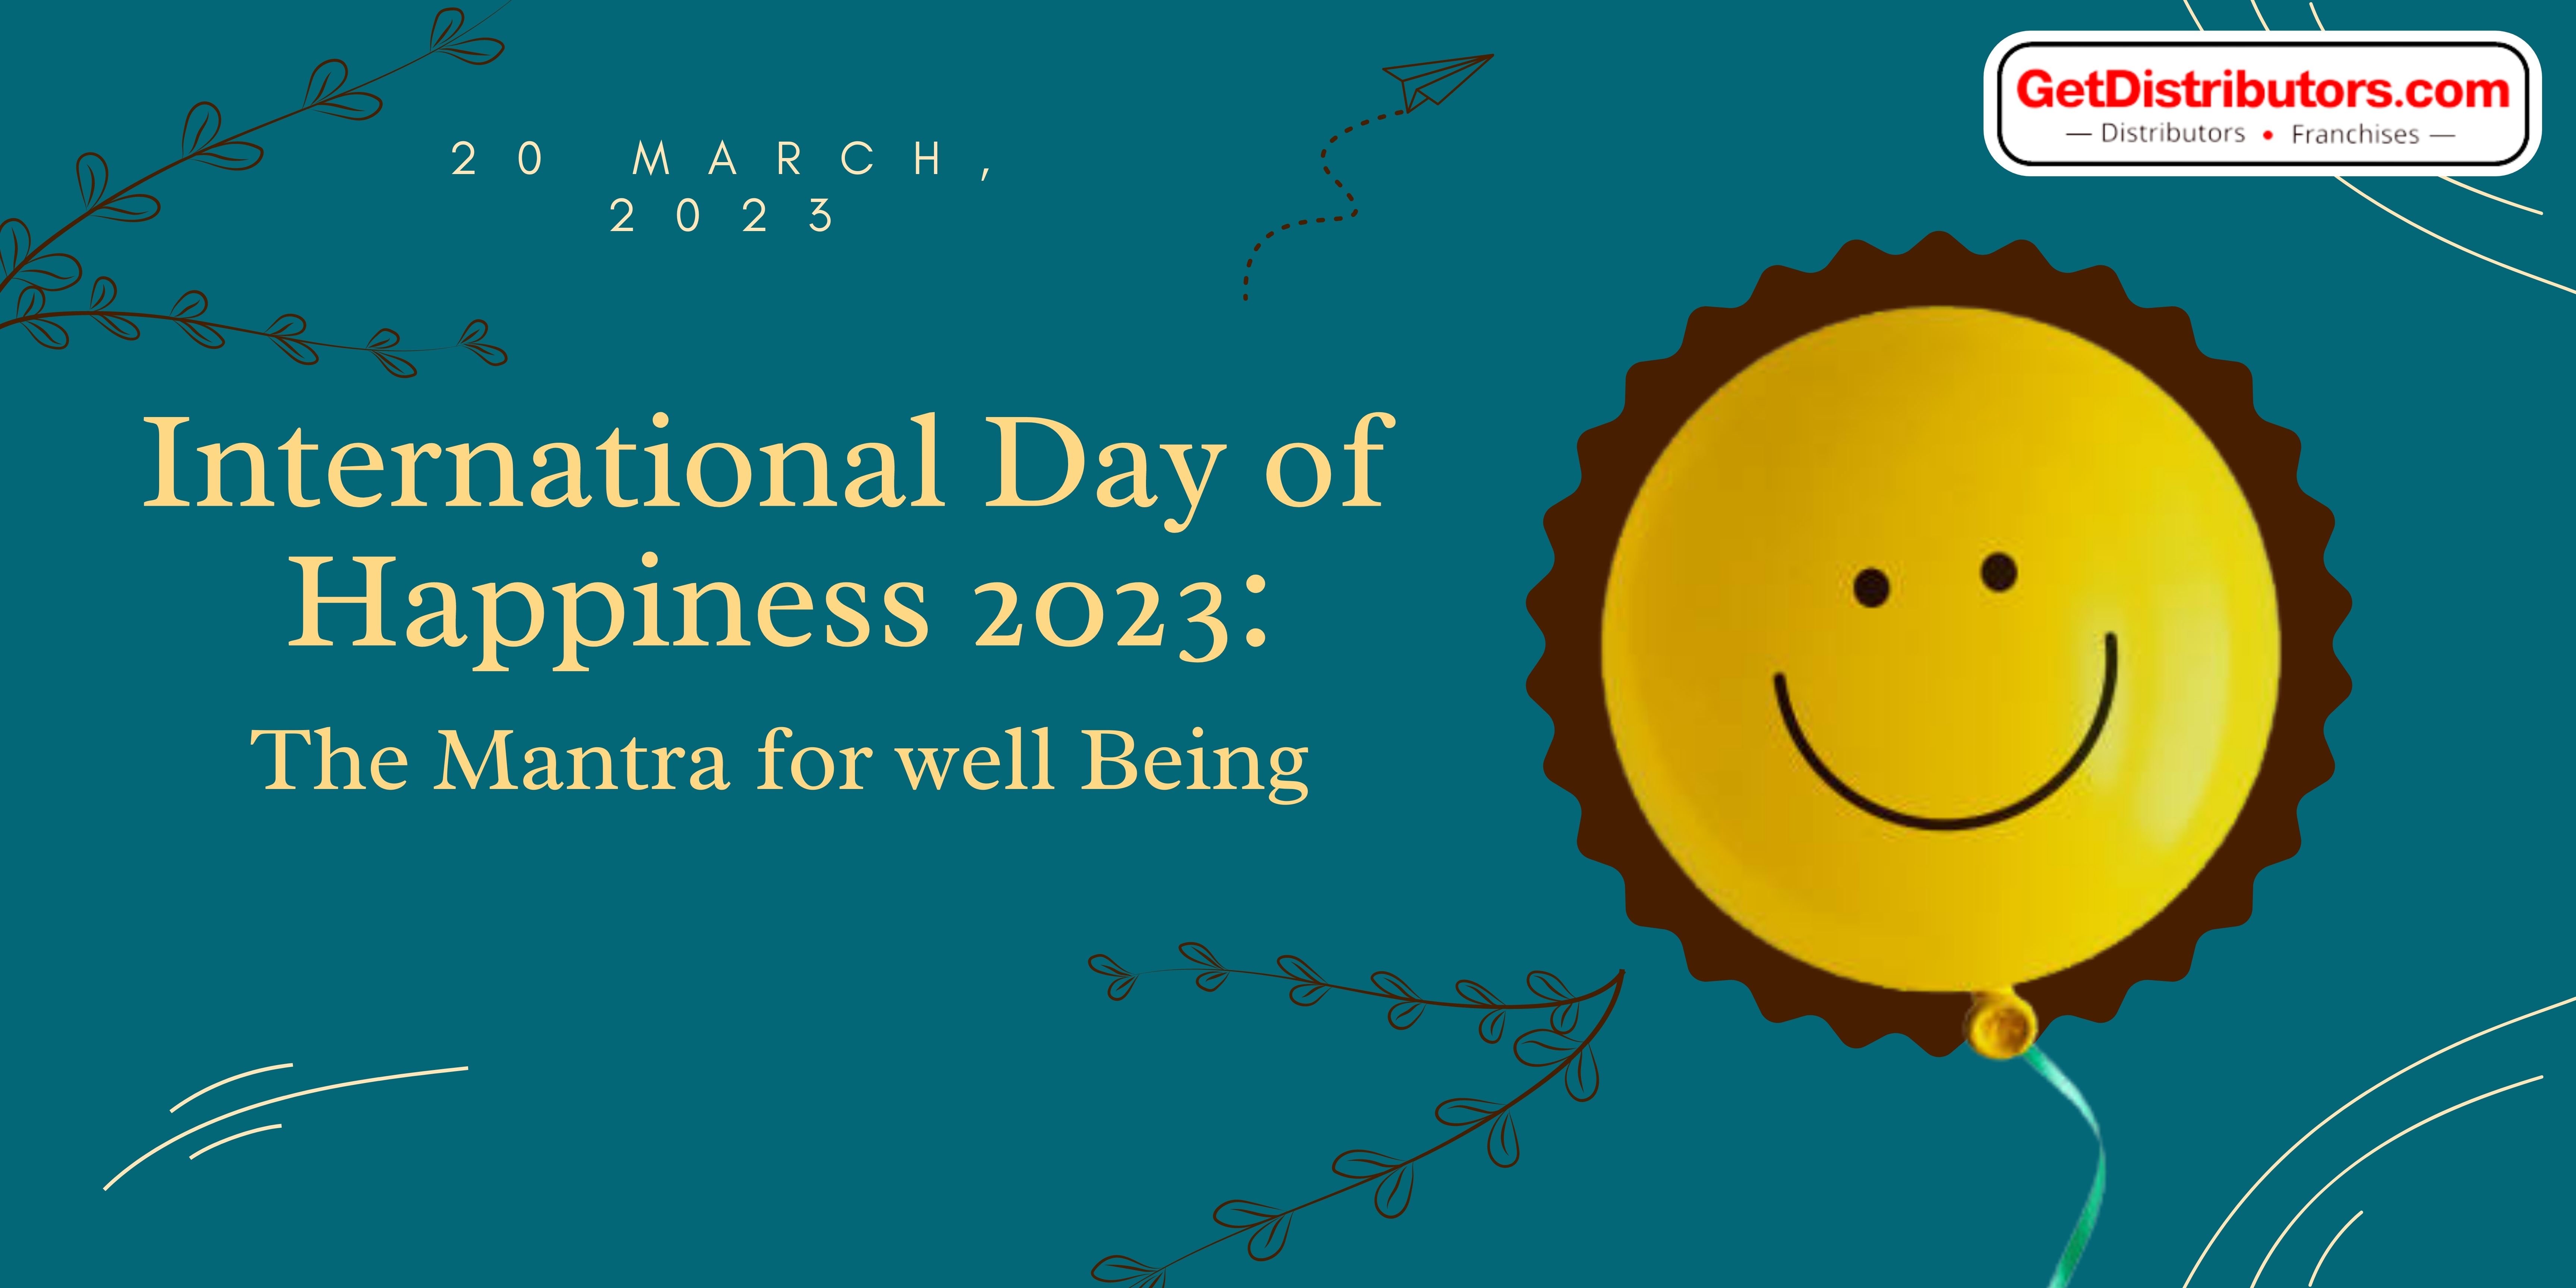 International Day of Happiness 2023: The Mantra for well Being